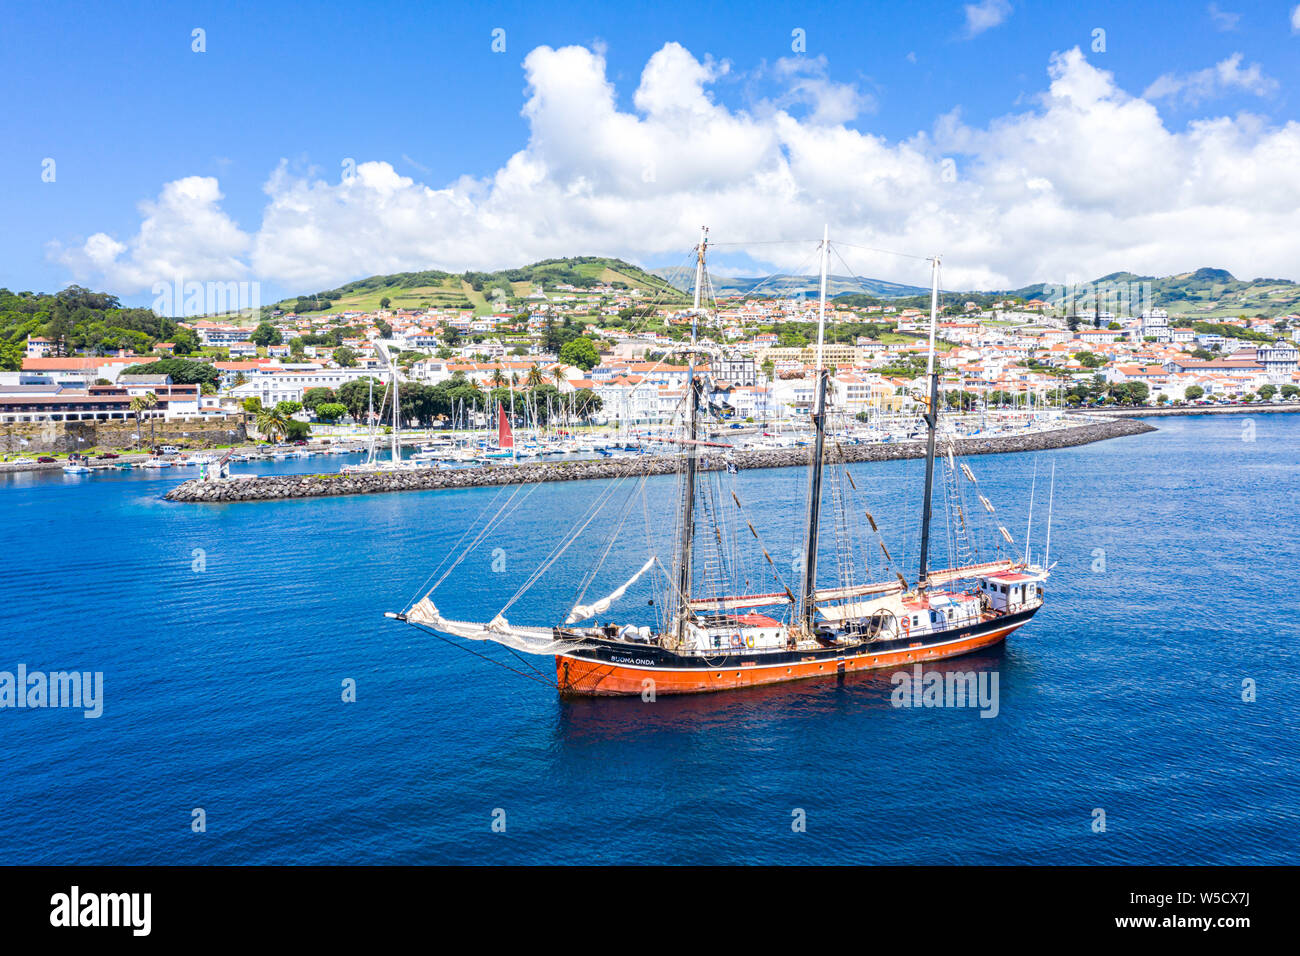 Horta, Portugal - Jul 16 2019: Aerial view of three masted schooner Sailing Vessel Buona Onda on roadstead, historical touristic hilly town centre and Stock Photo